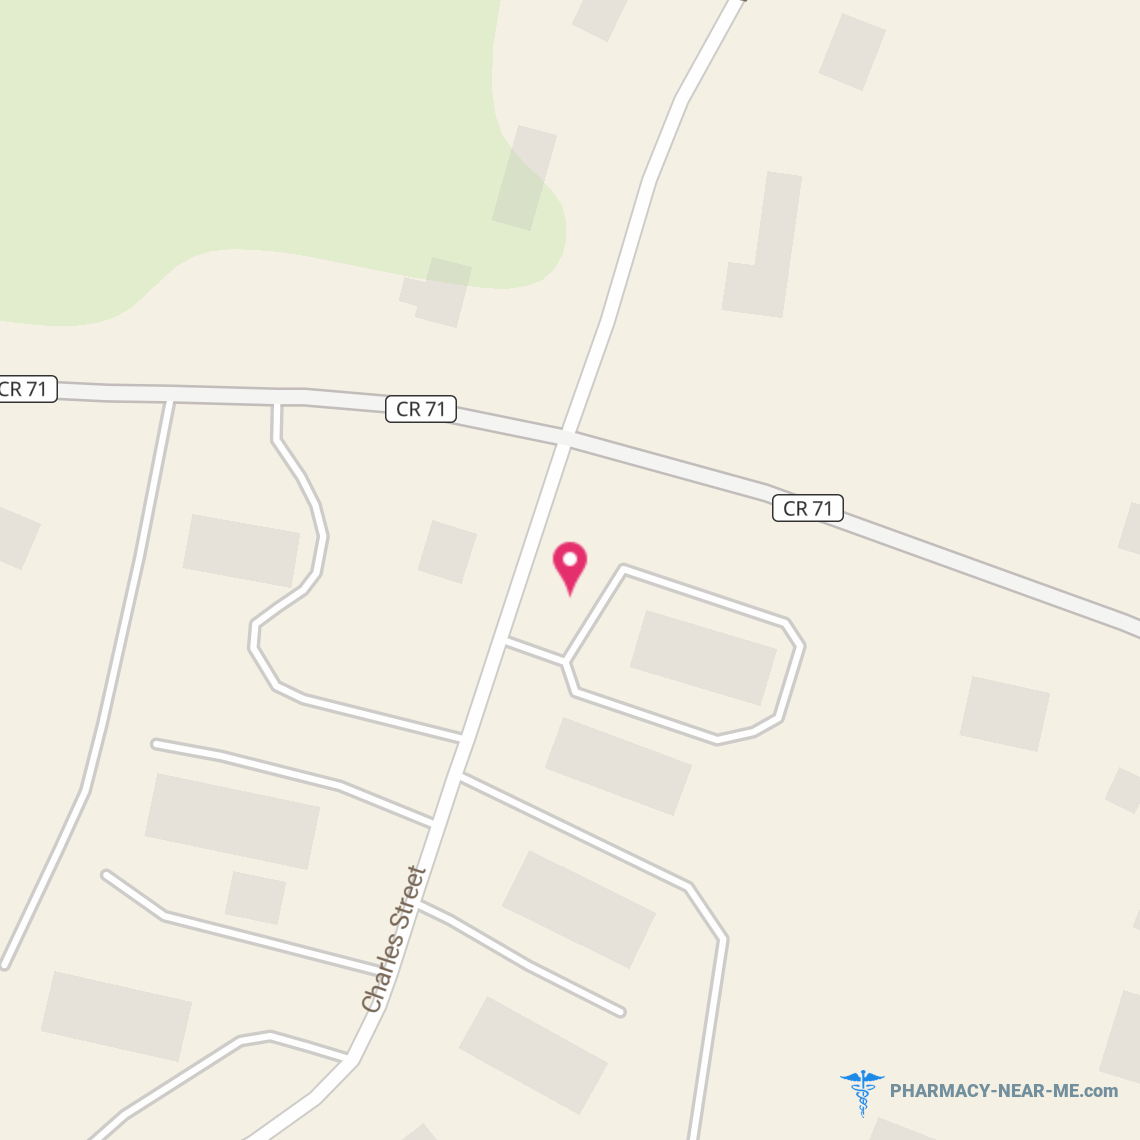 DERMASAVE LABS, INC - Pharmacy Hours, Phone, Reviews & Information: 3 Charles Street, Pleasant Valley, New York 12569, United States